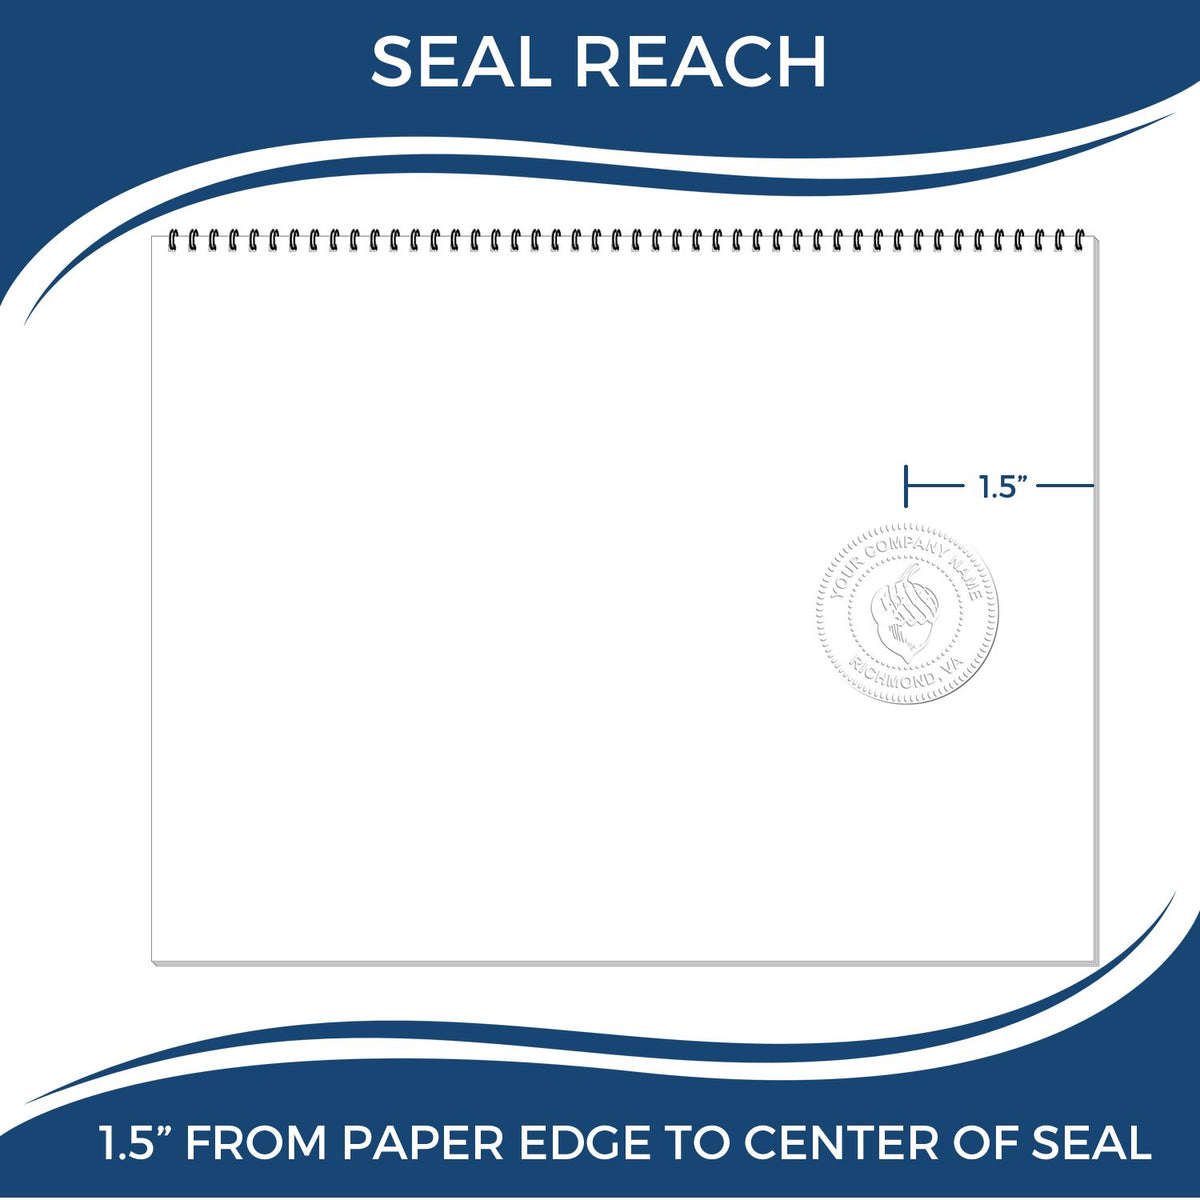 An infographic showing the seal reach which is represented by a ruler and a miniature seal image of the State of Missouri Architectural Seal Embosser